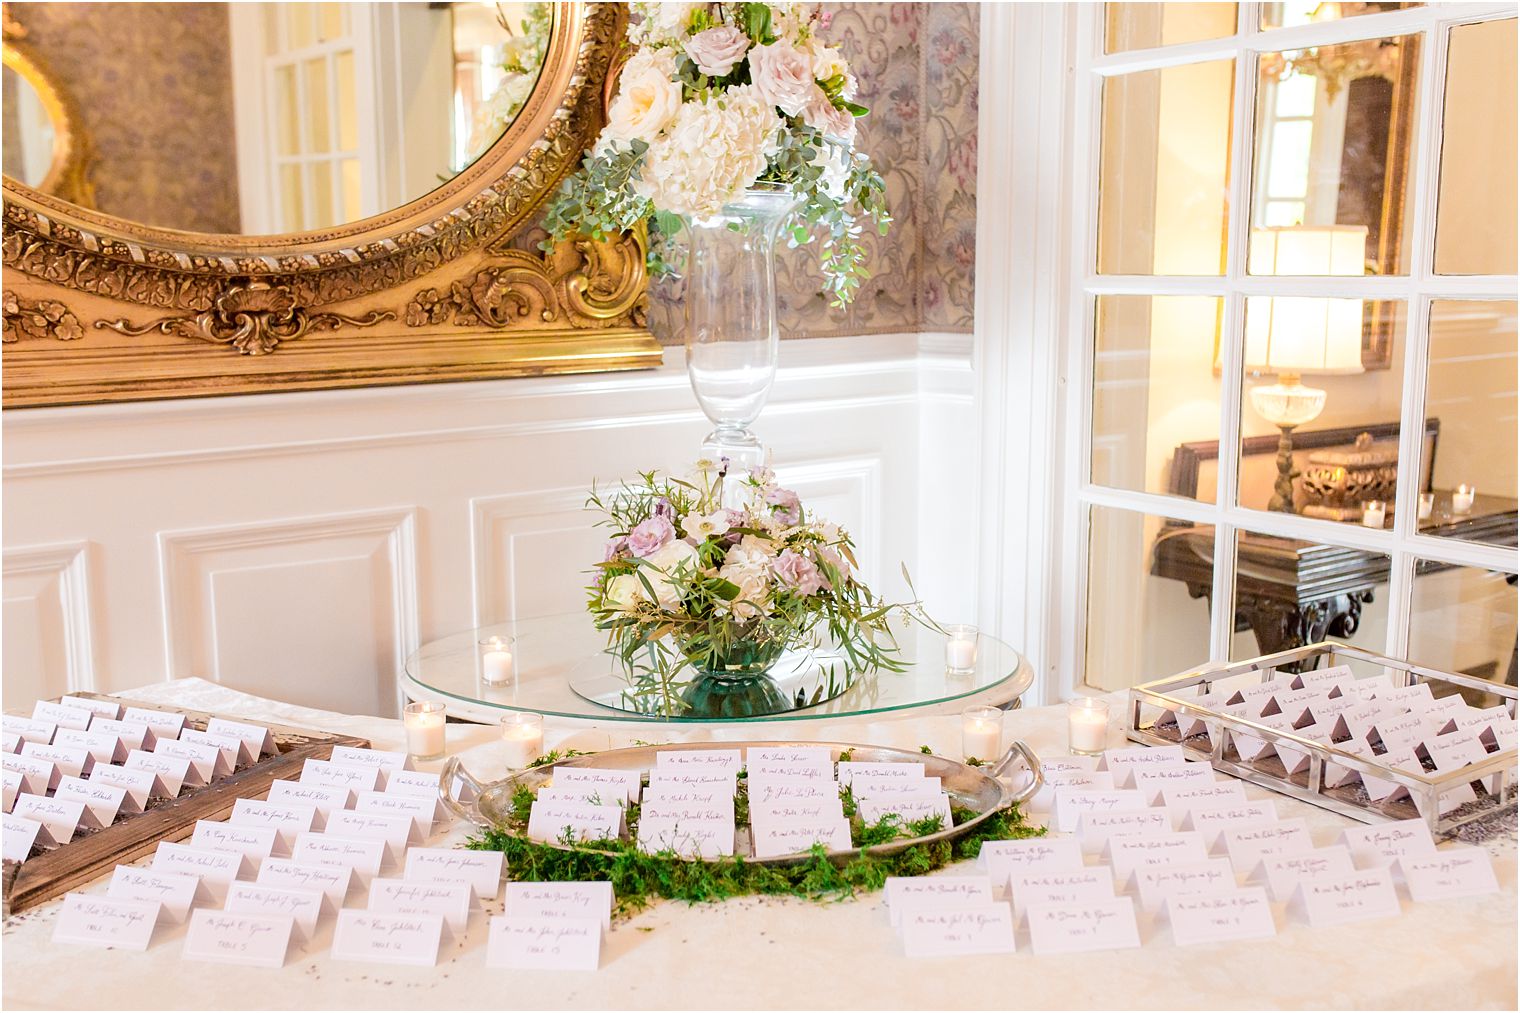 Seating card table with lavender and moss